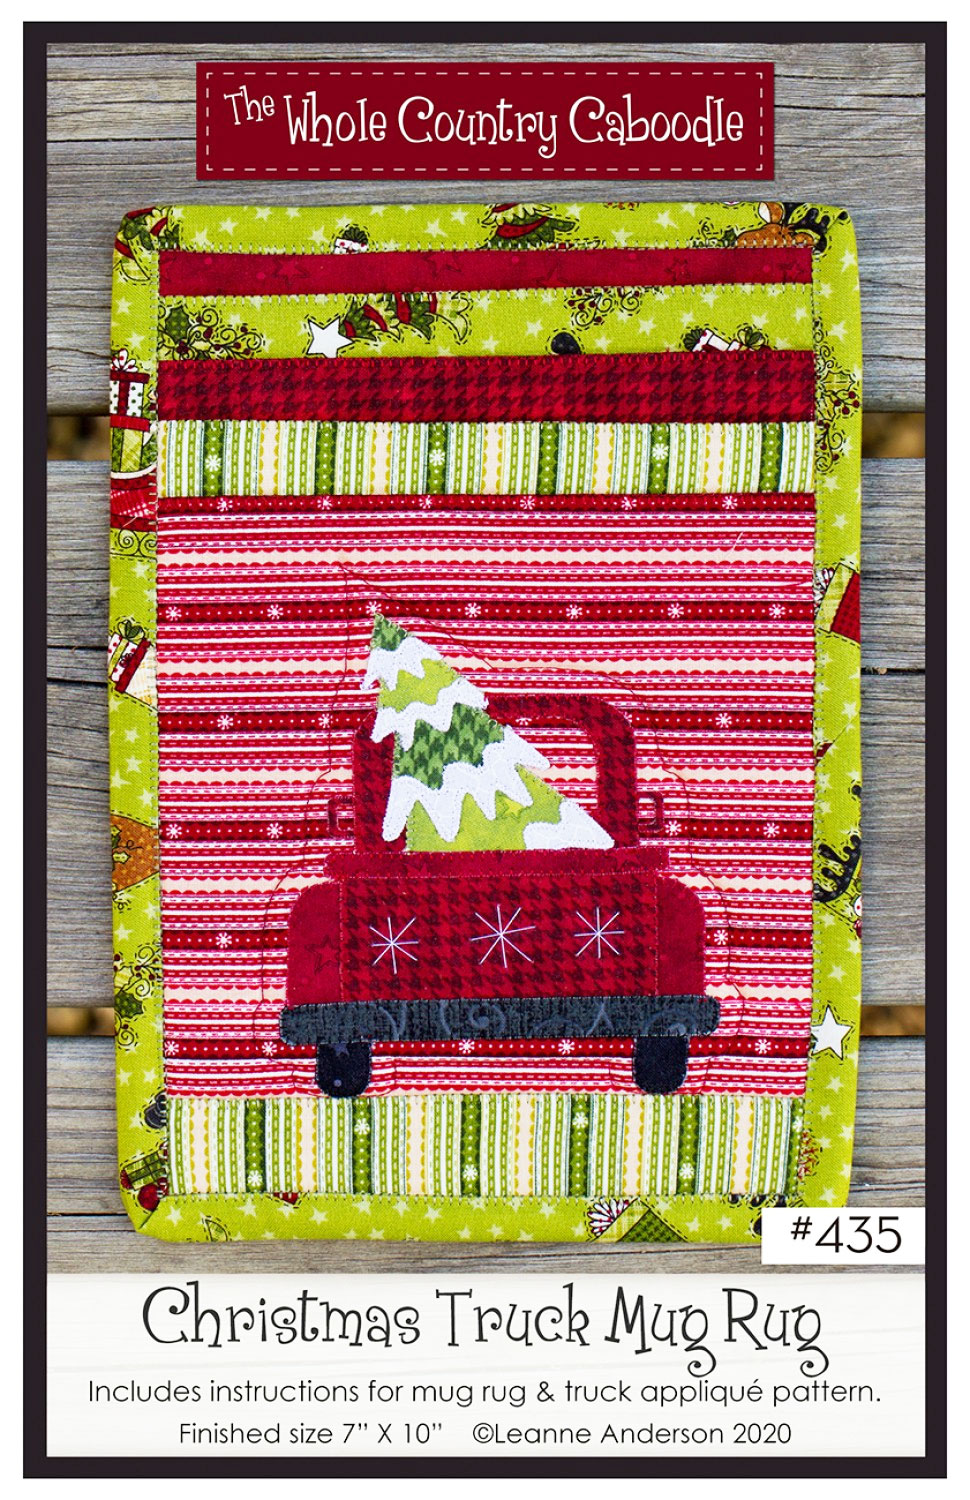 Christmas-Truck-Mug-Rug-sewing-pattern-The-Whole-Country-Caboodle-front